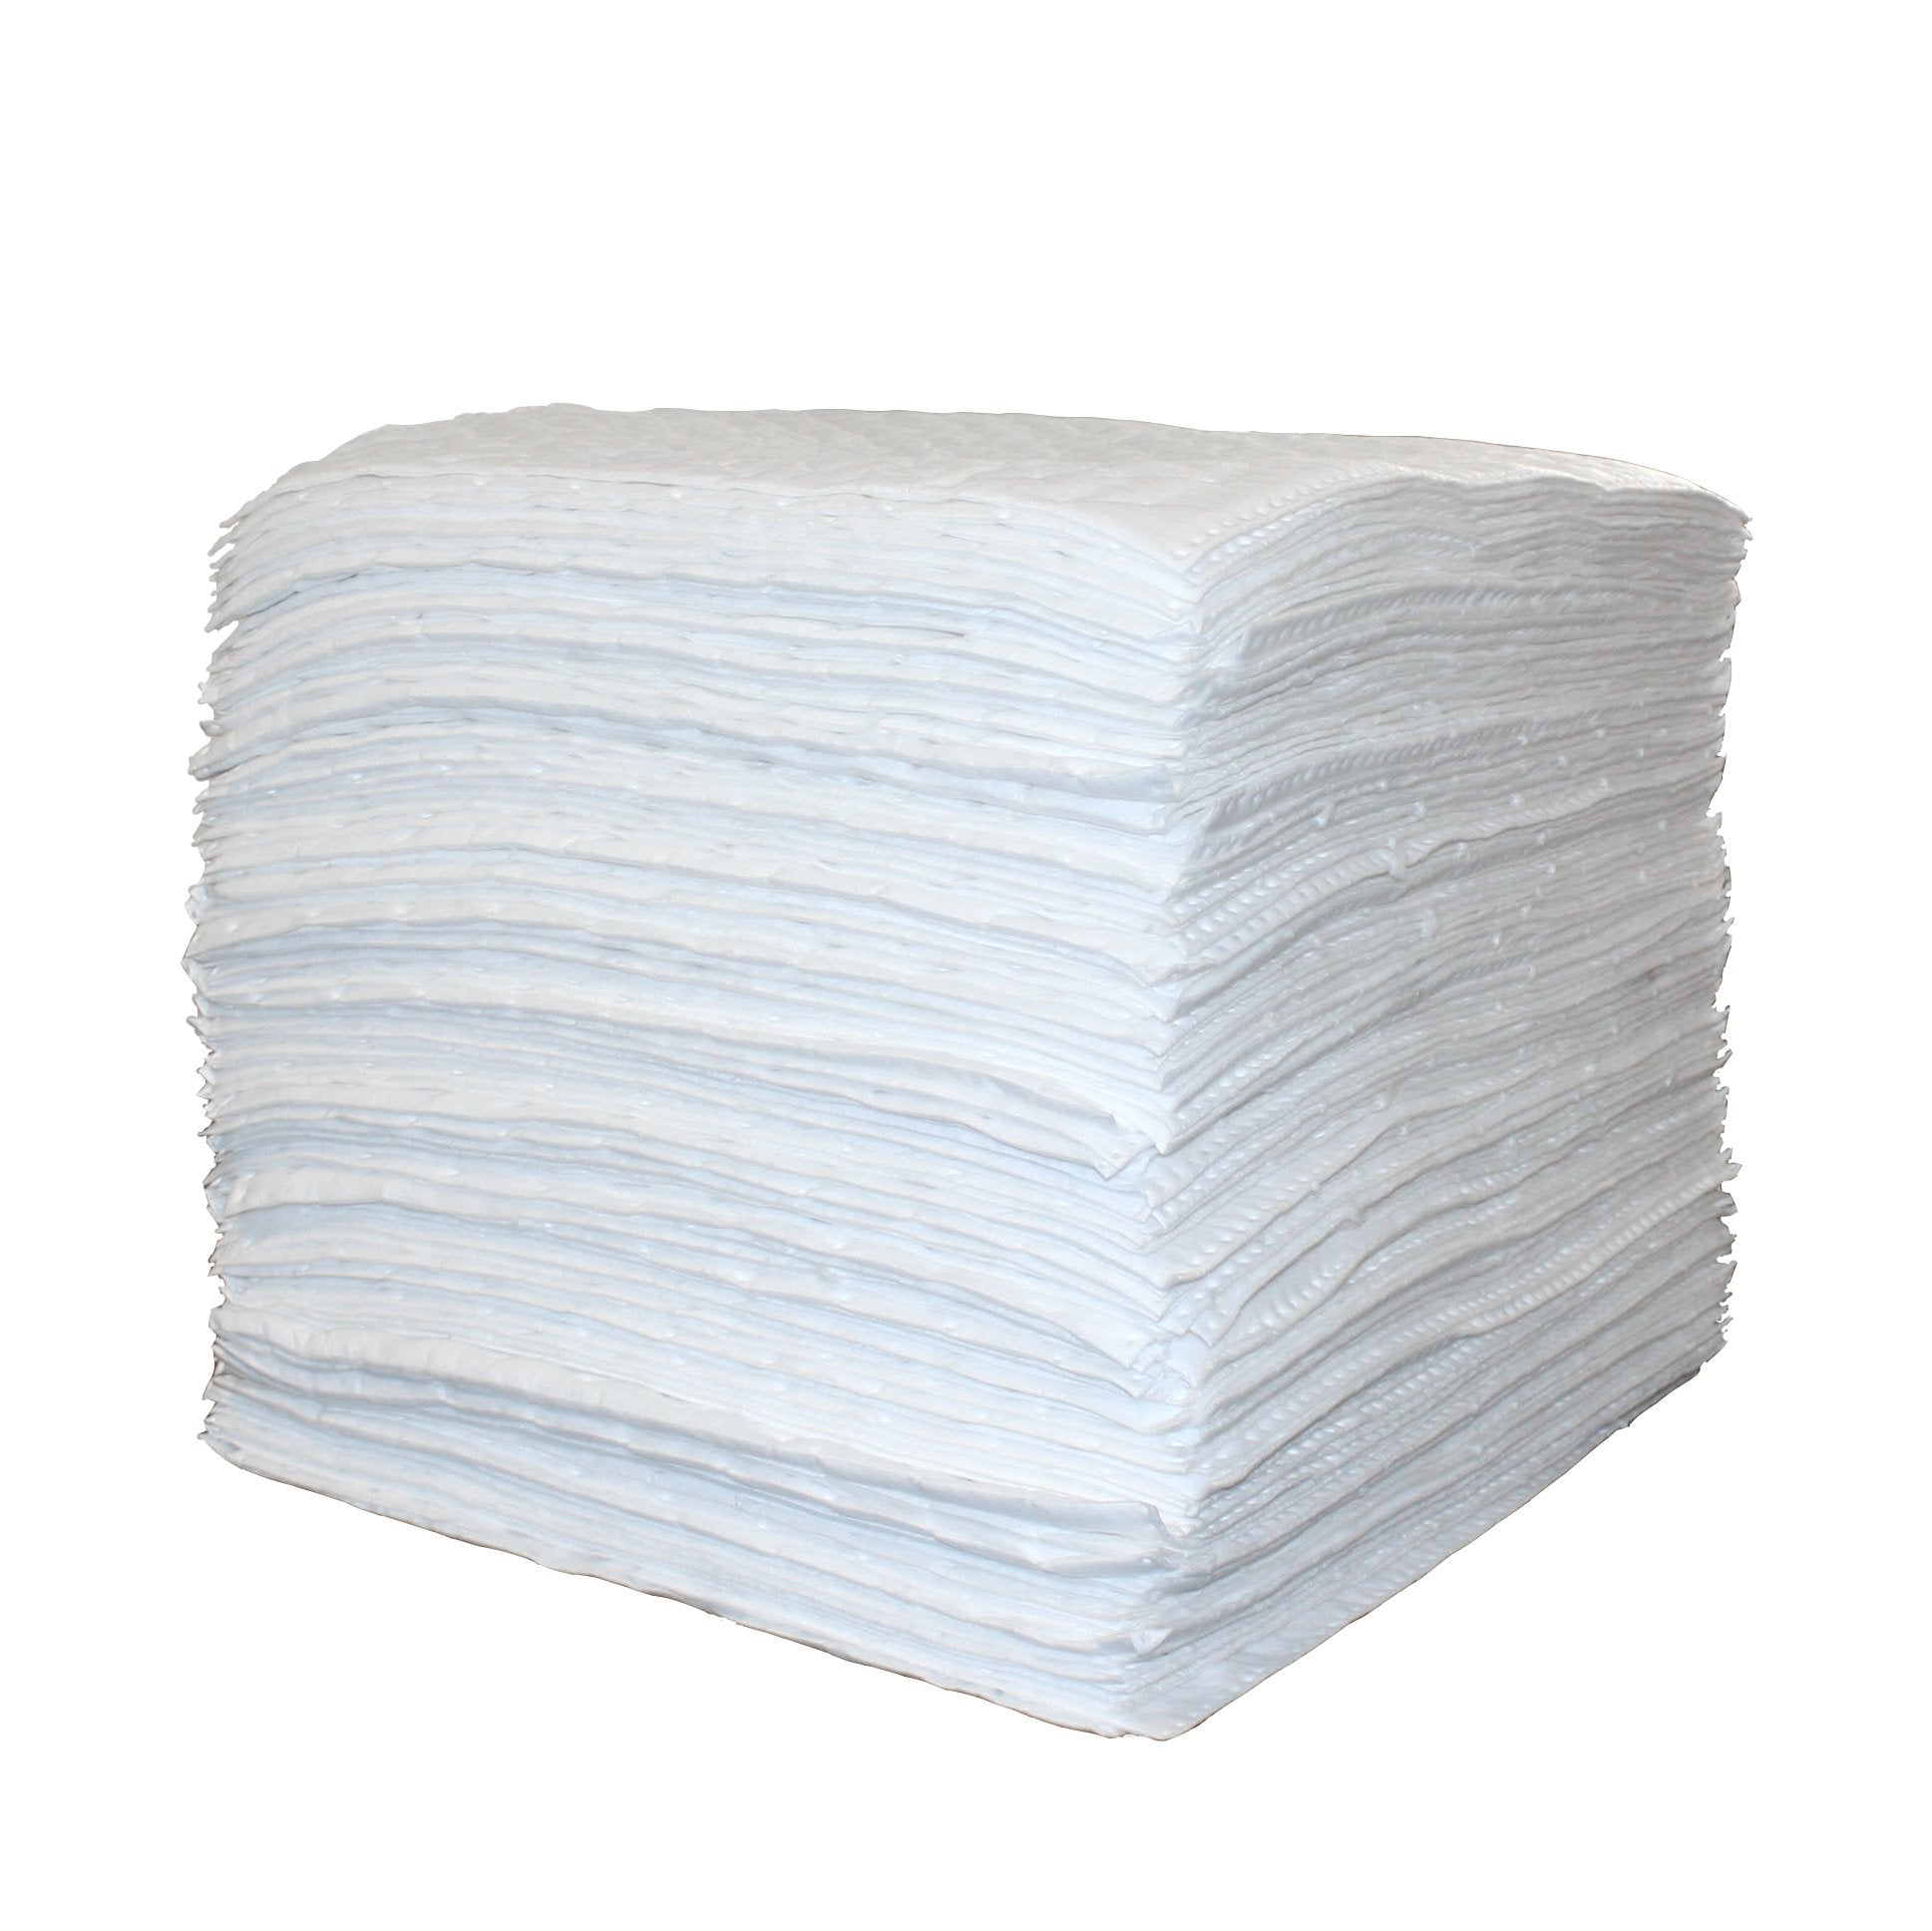 Recycled FiberDuck Oil-Only Heavy-weight Absorbent Pads - 100/BALE-eSafety Supplies, Inc